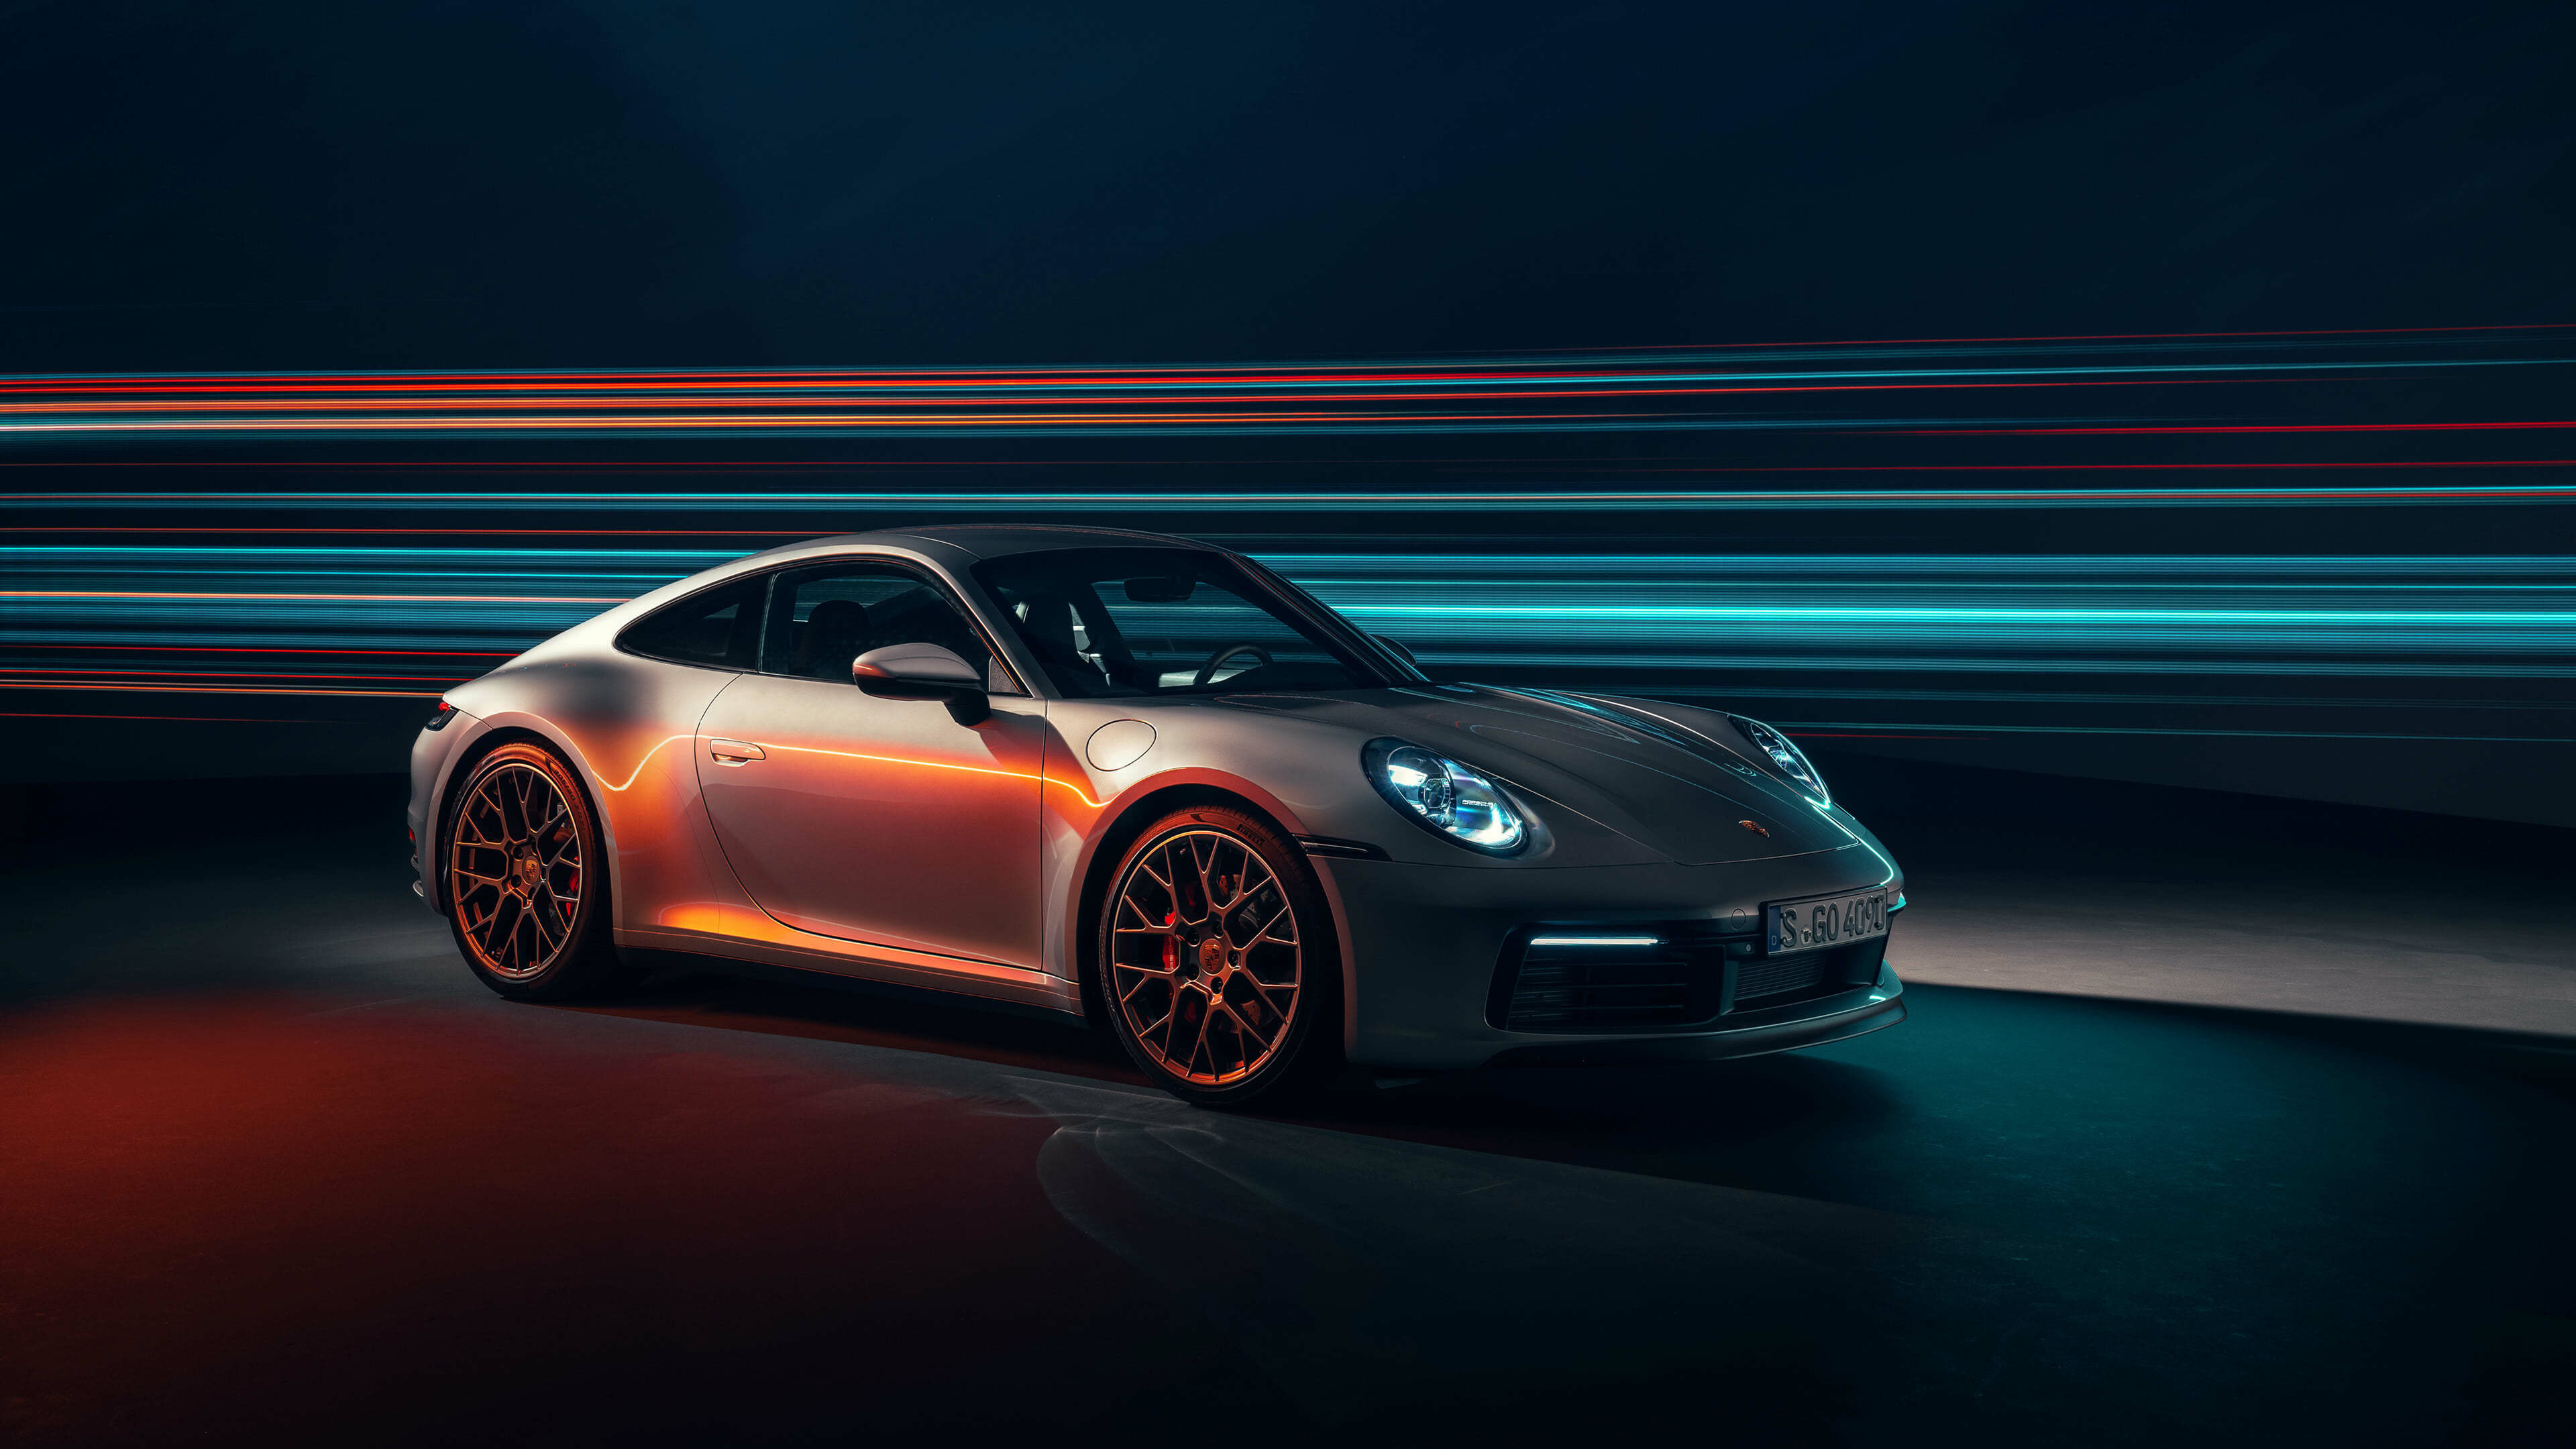 Porsche: The shape of the 911 Carrera is unmistakable because of its iconic fly line and elegant roof lines. 3840x2160 4K Wallpaper.